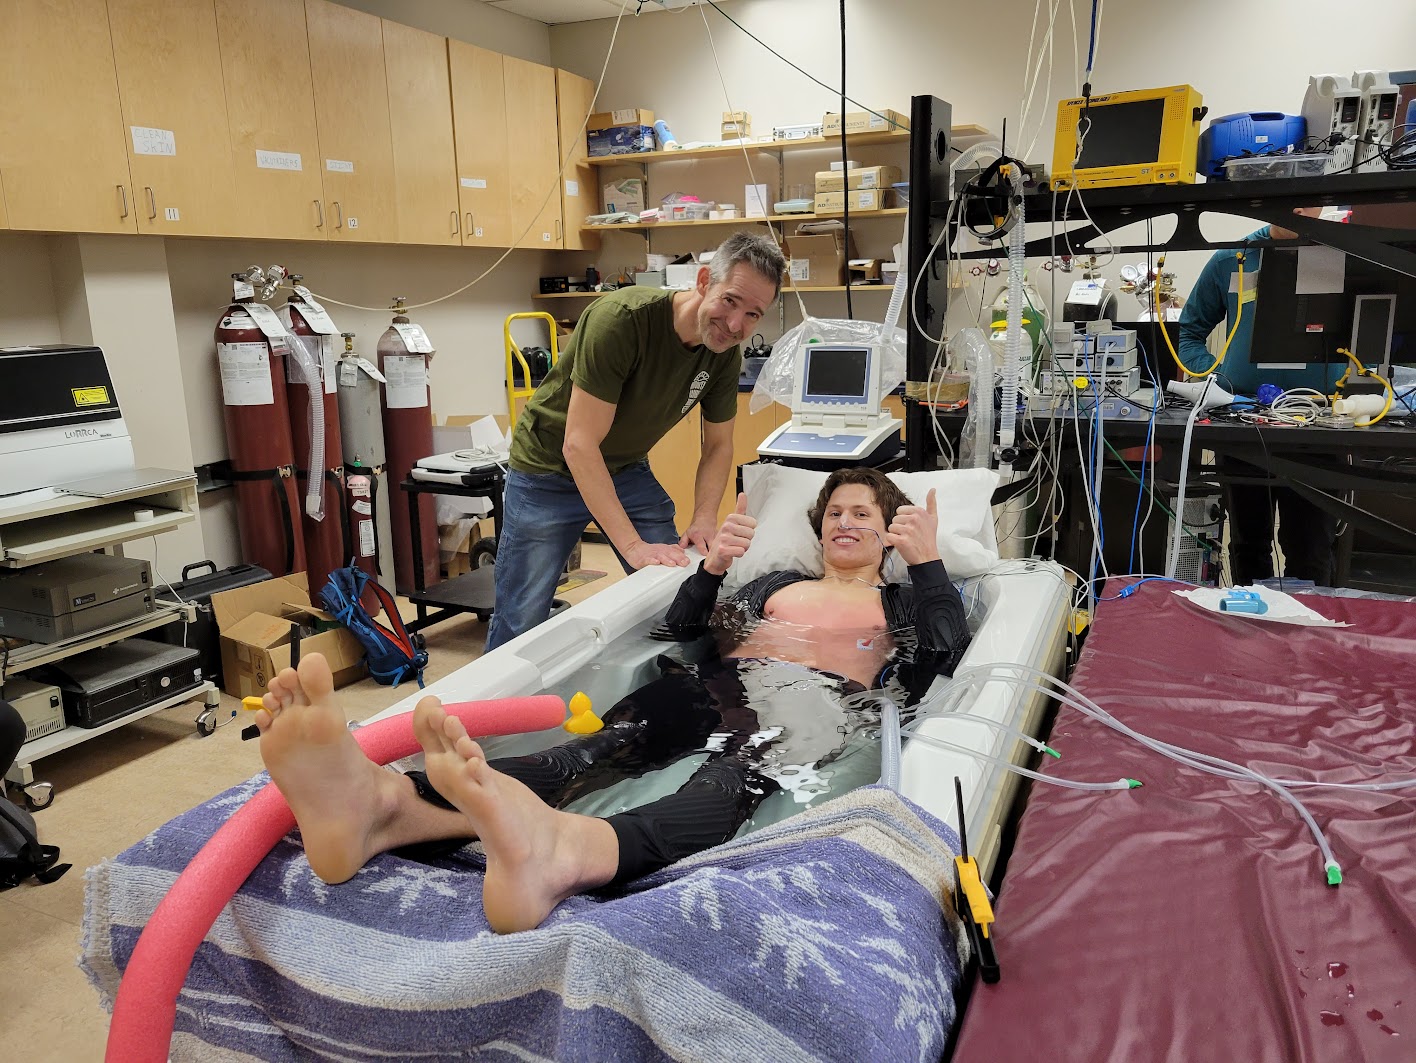 Dr. Phil Ainslie watches on as undergraduate student Justin Monteleone completes a hypothermia protocol. This involved laying submerged for up to an hour in seven-degree Celsius water.